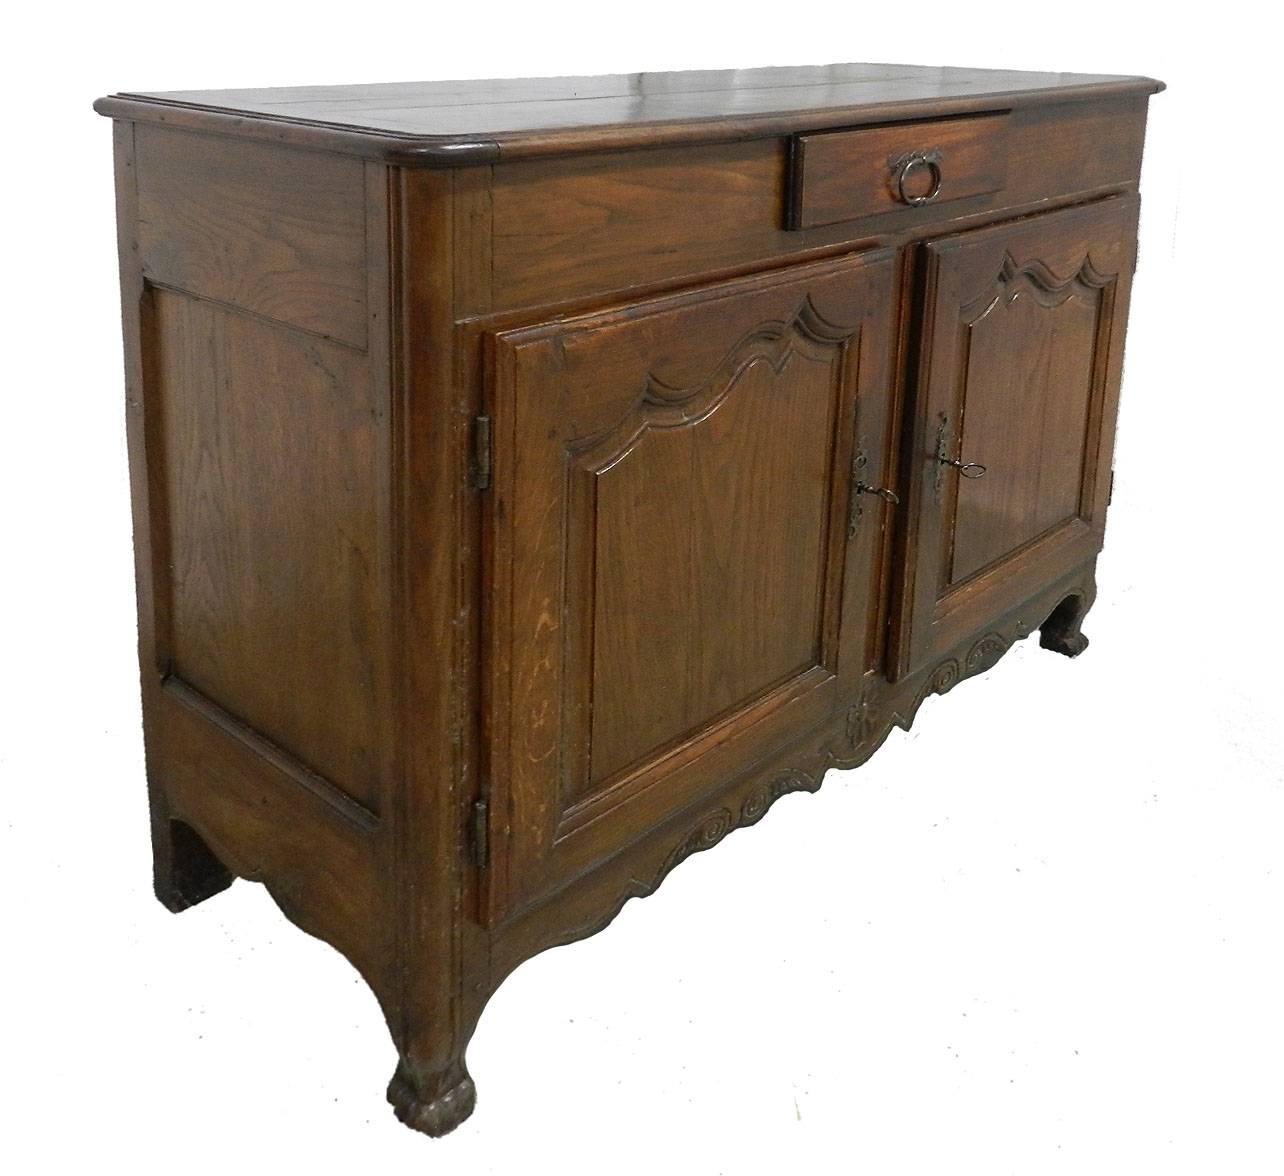 Antique French Provincial buffet dresser sideboard
19th century Louis XV, circa 1790
Oak French country house
Lovely color to the wood with good aged patina
Two plank top with moulded edge detail
Lion paw feet
Original keys
Good antique original